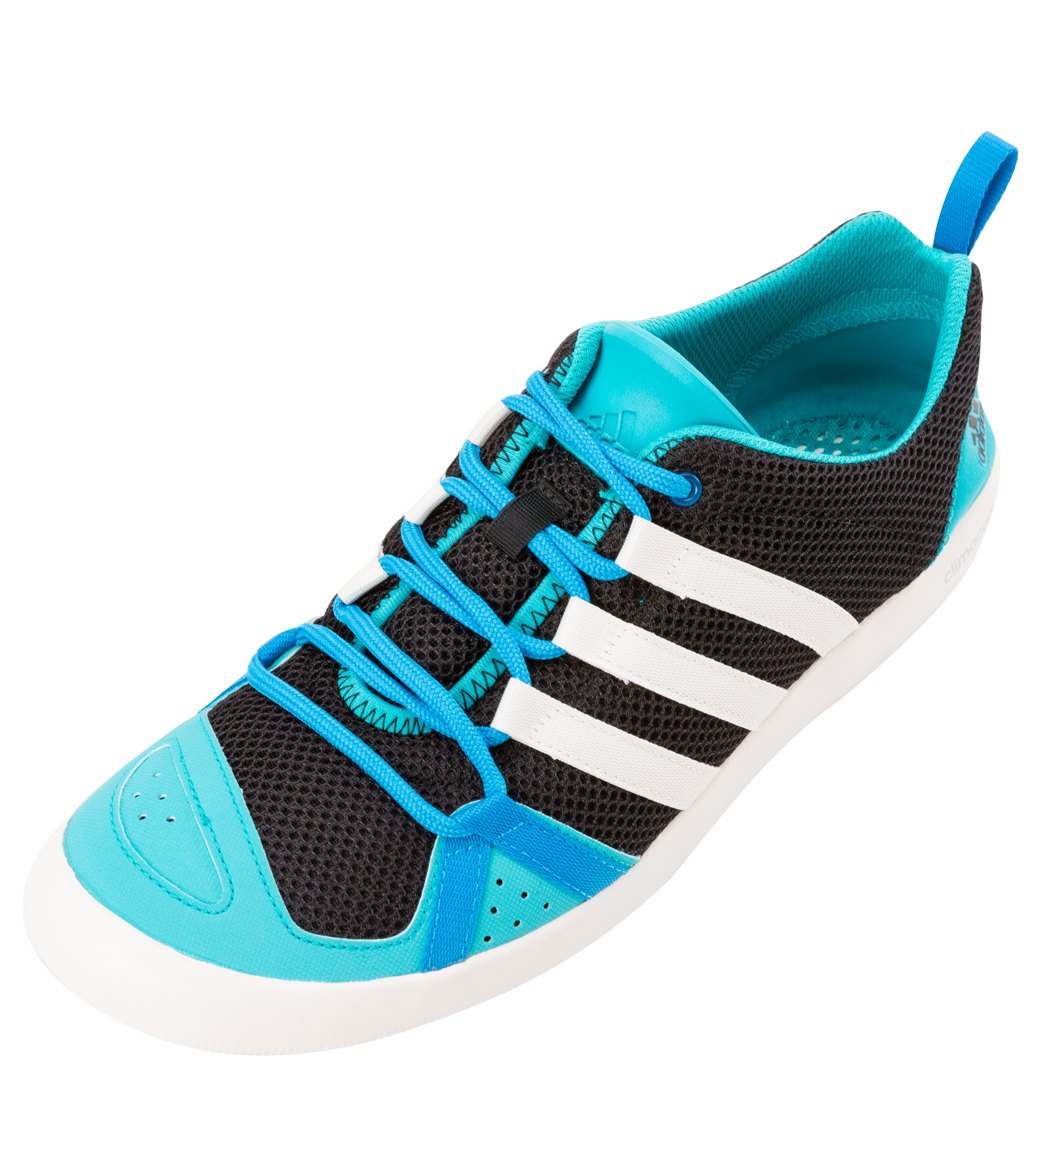 adidas climacool boat lace shoes review